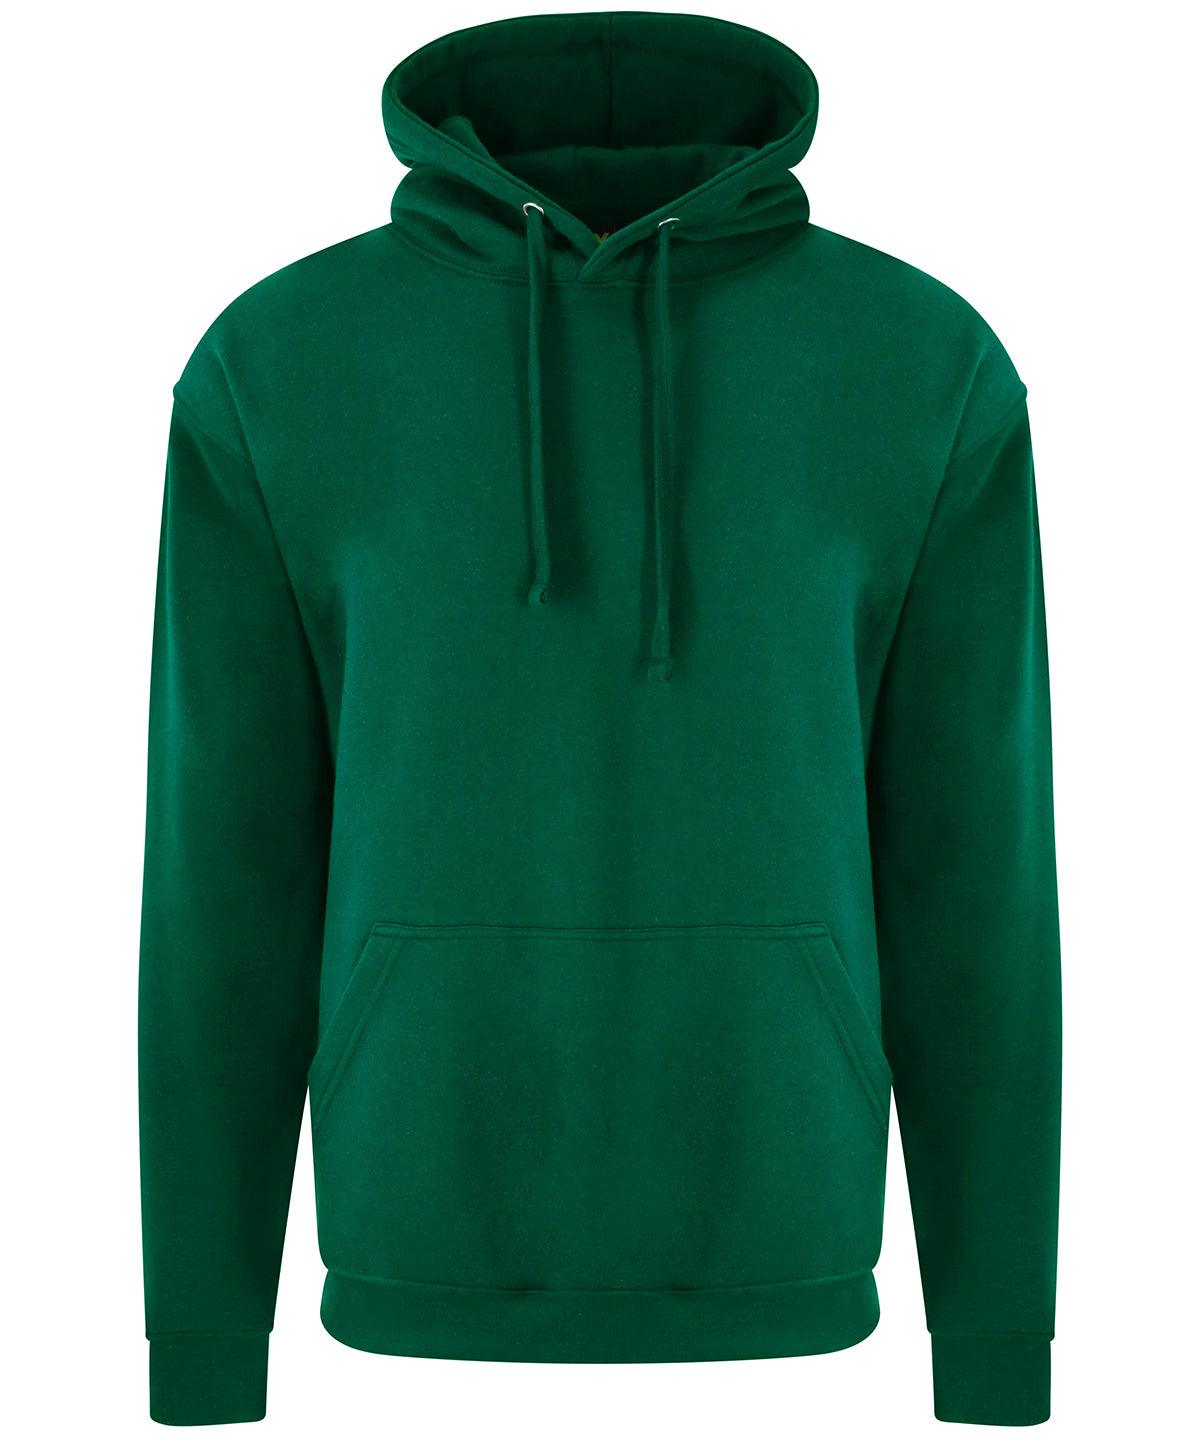 Bottle Green - Pro hoodie Hoodies ProRTX Back to Business, Home of the hoodie, Hoodies, Must Haves, New Colours for 2021, Workwear Schoolwear Centres